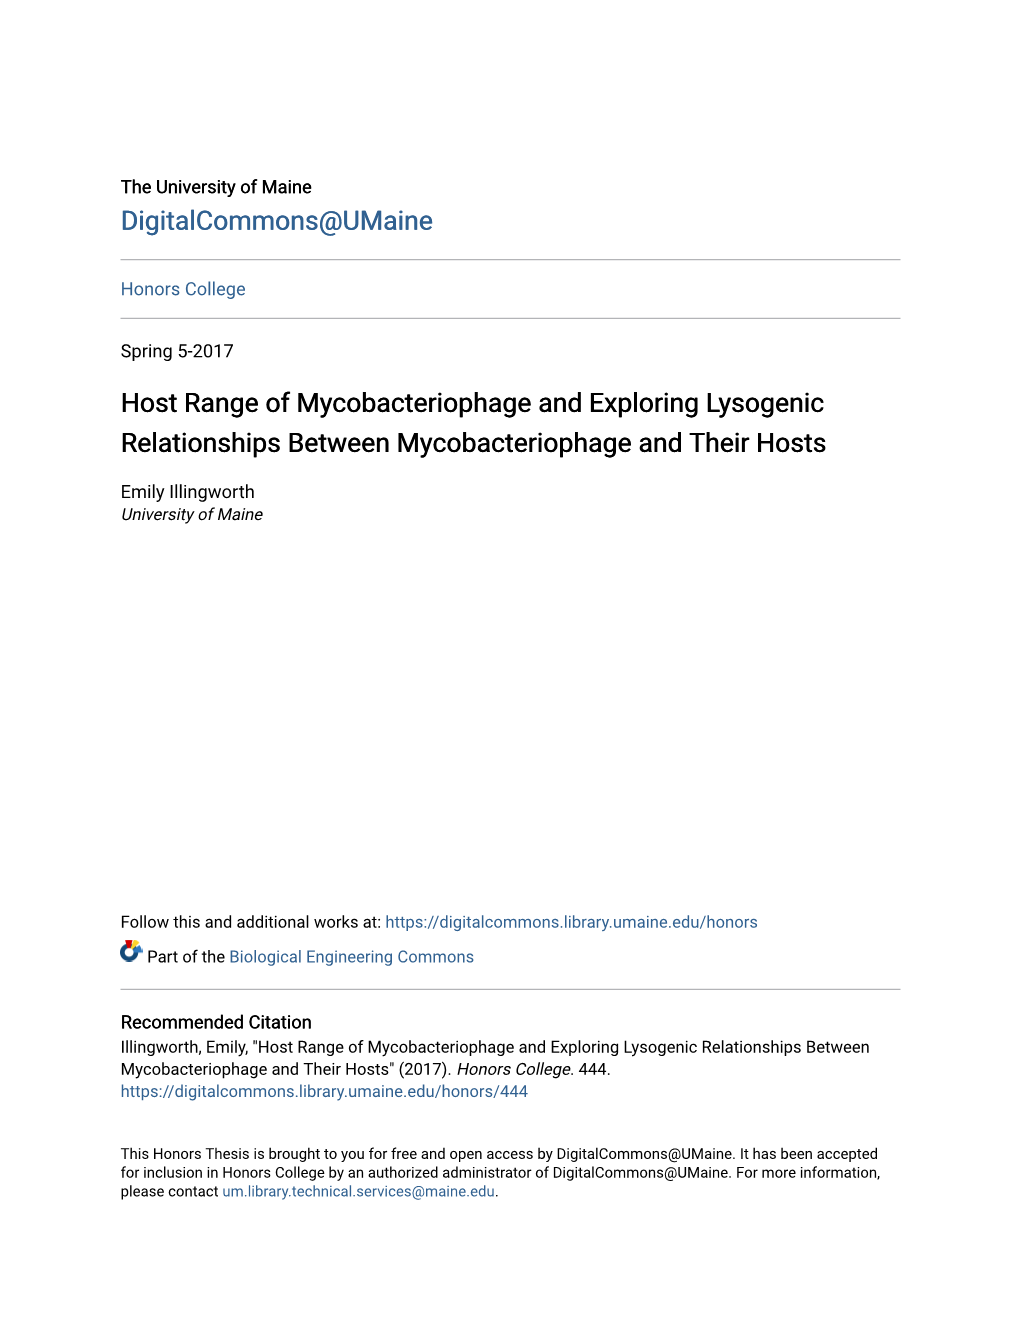 Host Range of Mycobacteriophage and Exploring Lysogenic Relationships Between Mycobacteriophage and Their Hosts